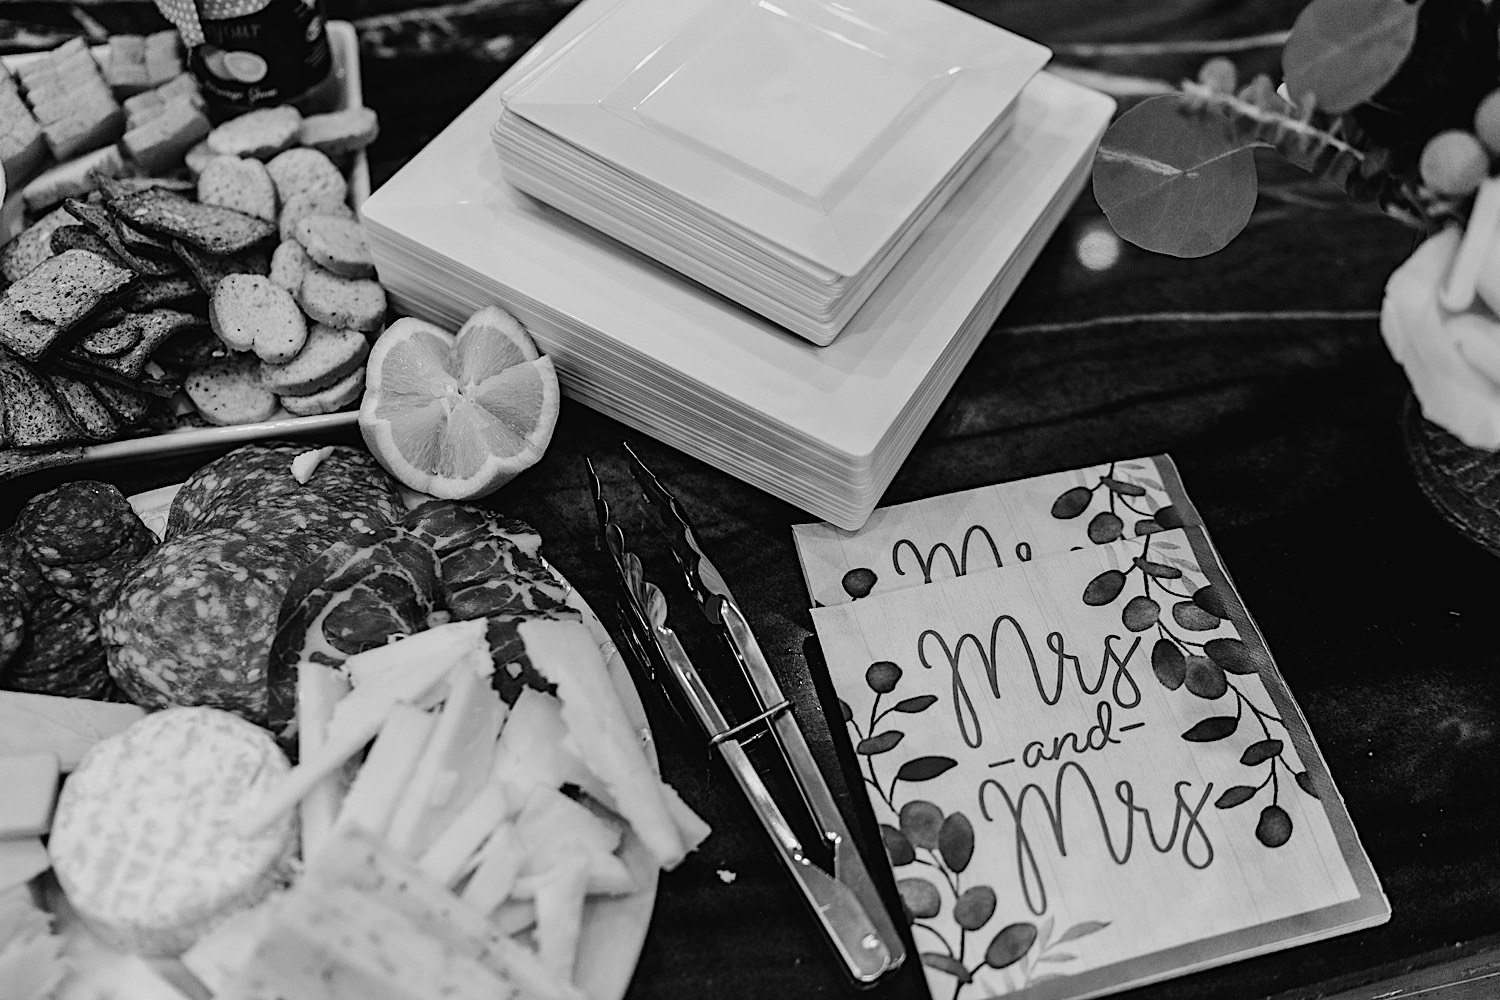 Black and white picture of snacks, tongs, plates and wedding cards